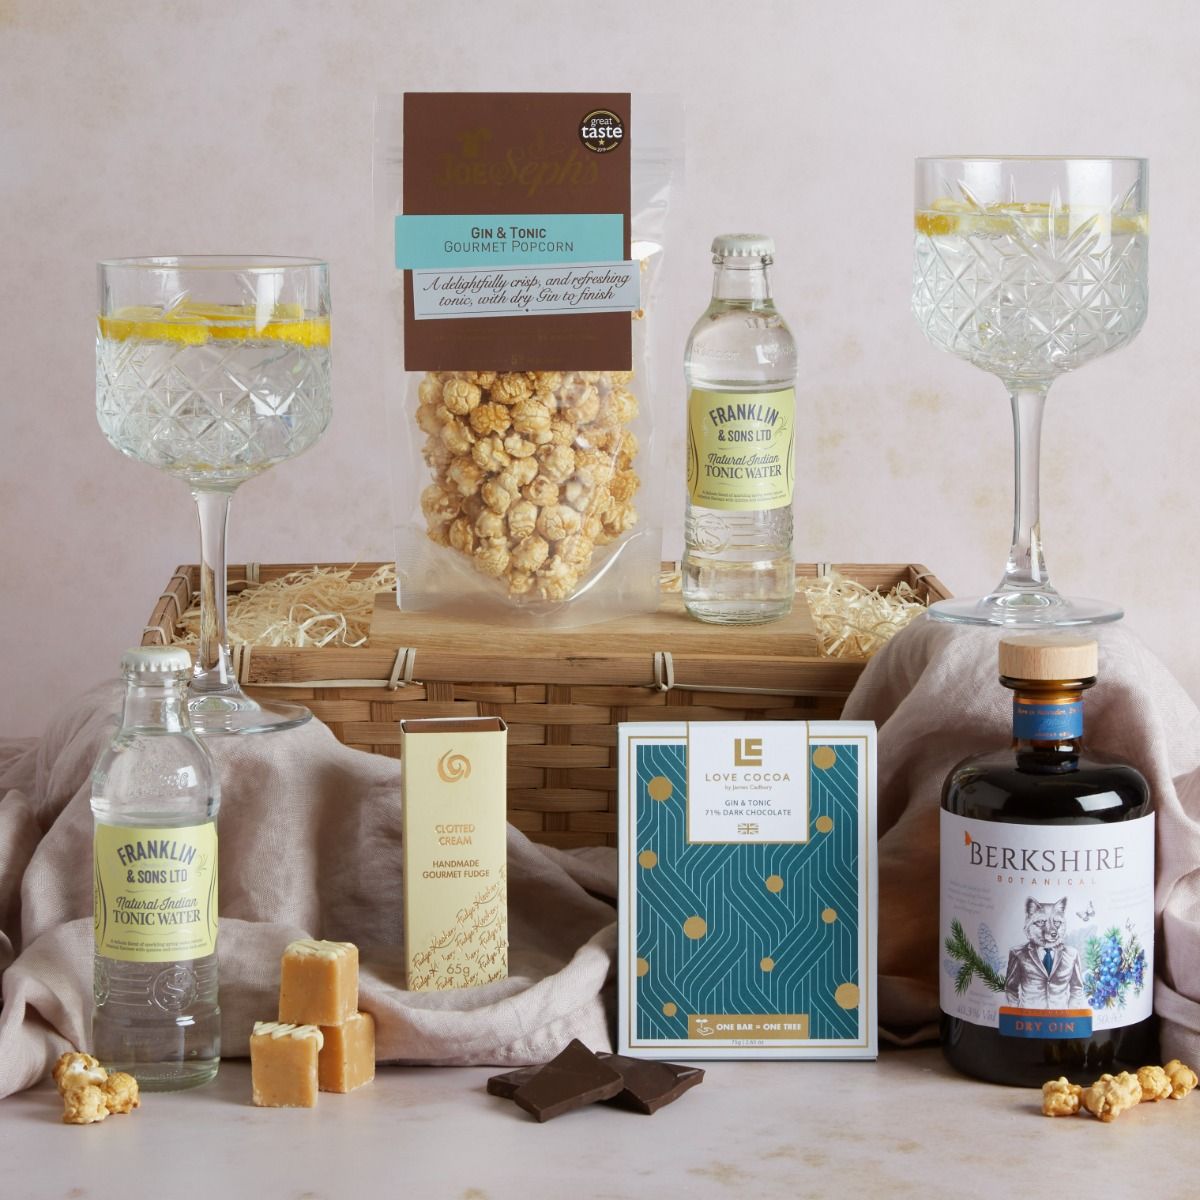 The Luxury Gin Hamper with contents on display - a perfect Father's Day gin gift